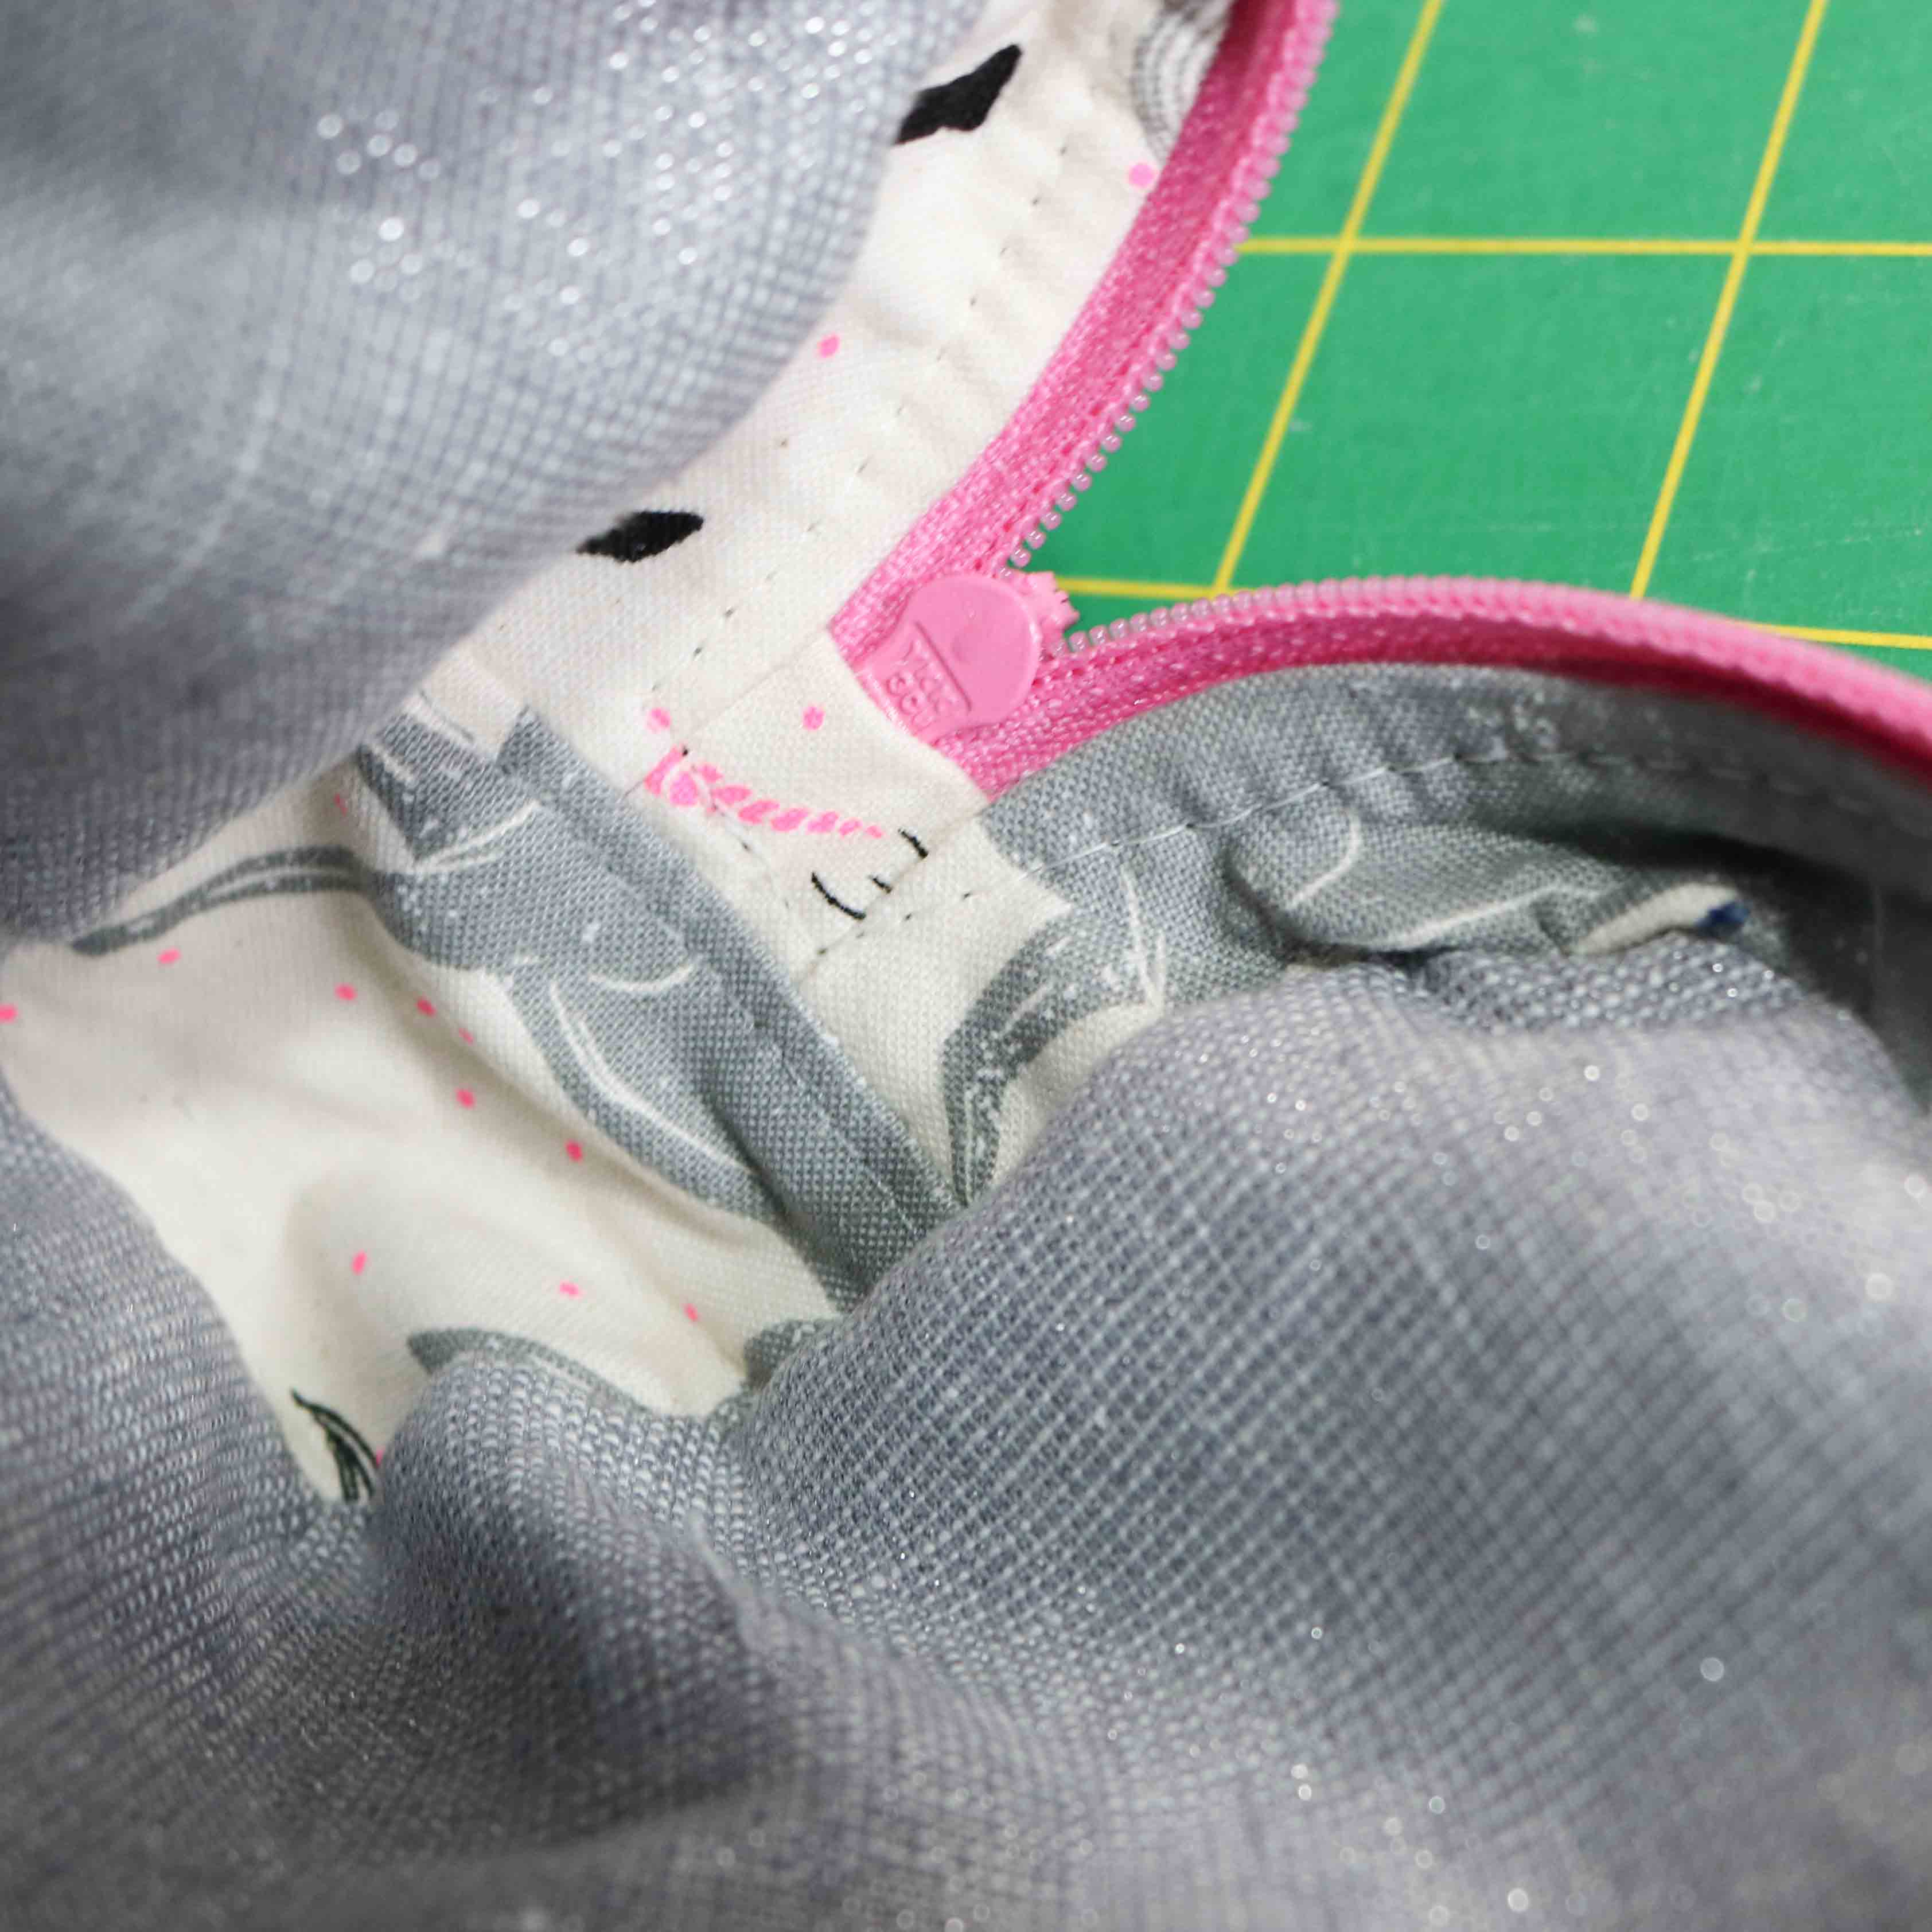 How to finish a bag with a Drop-In style Lining — RLR Creations